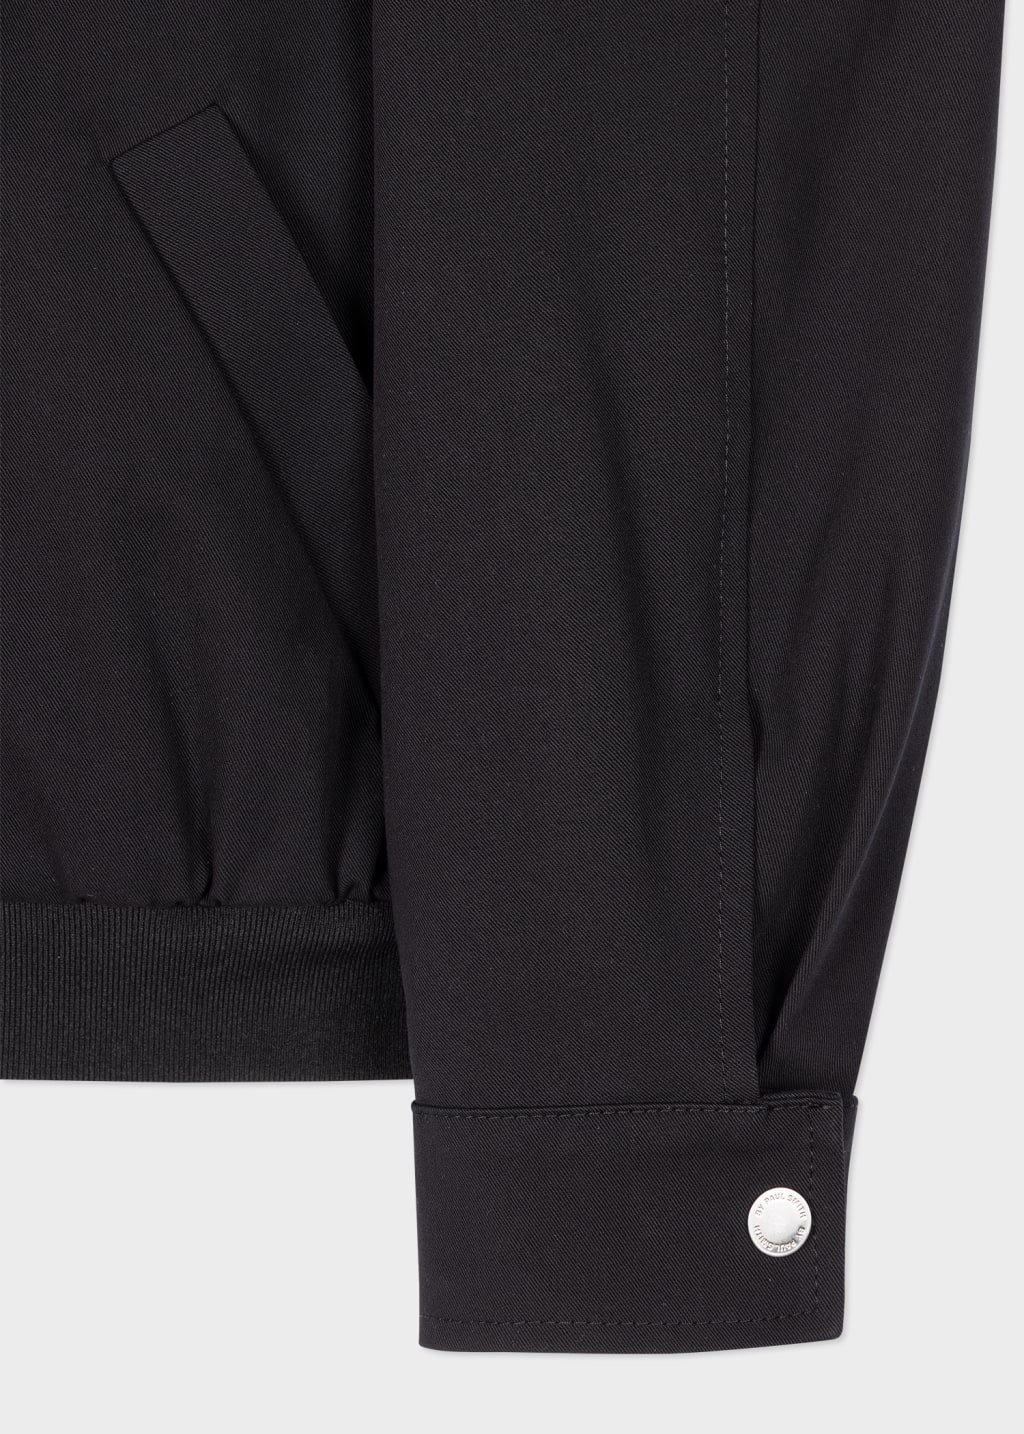 Detail View - Women's Black Cotton Bomber Jacket by Paul Smith